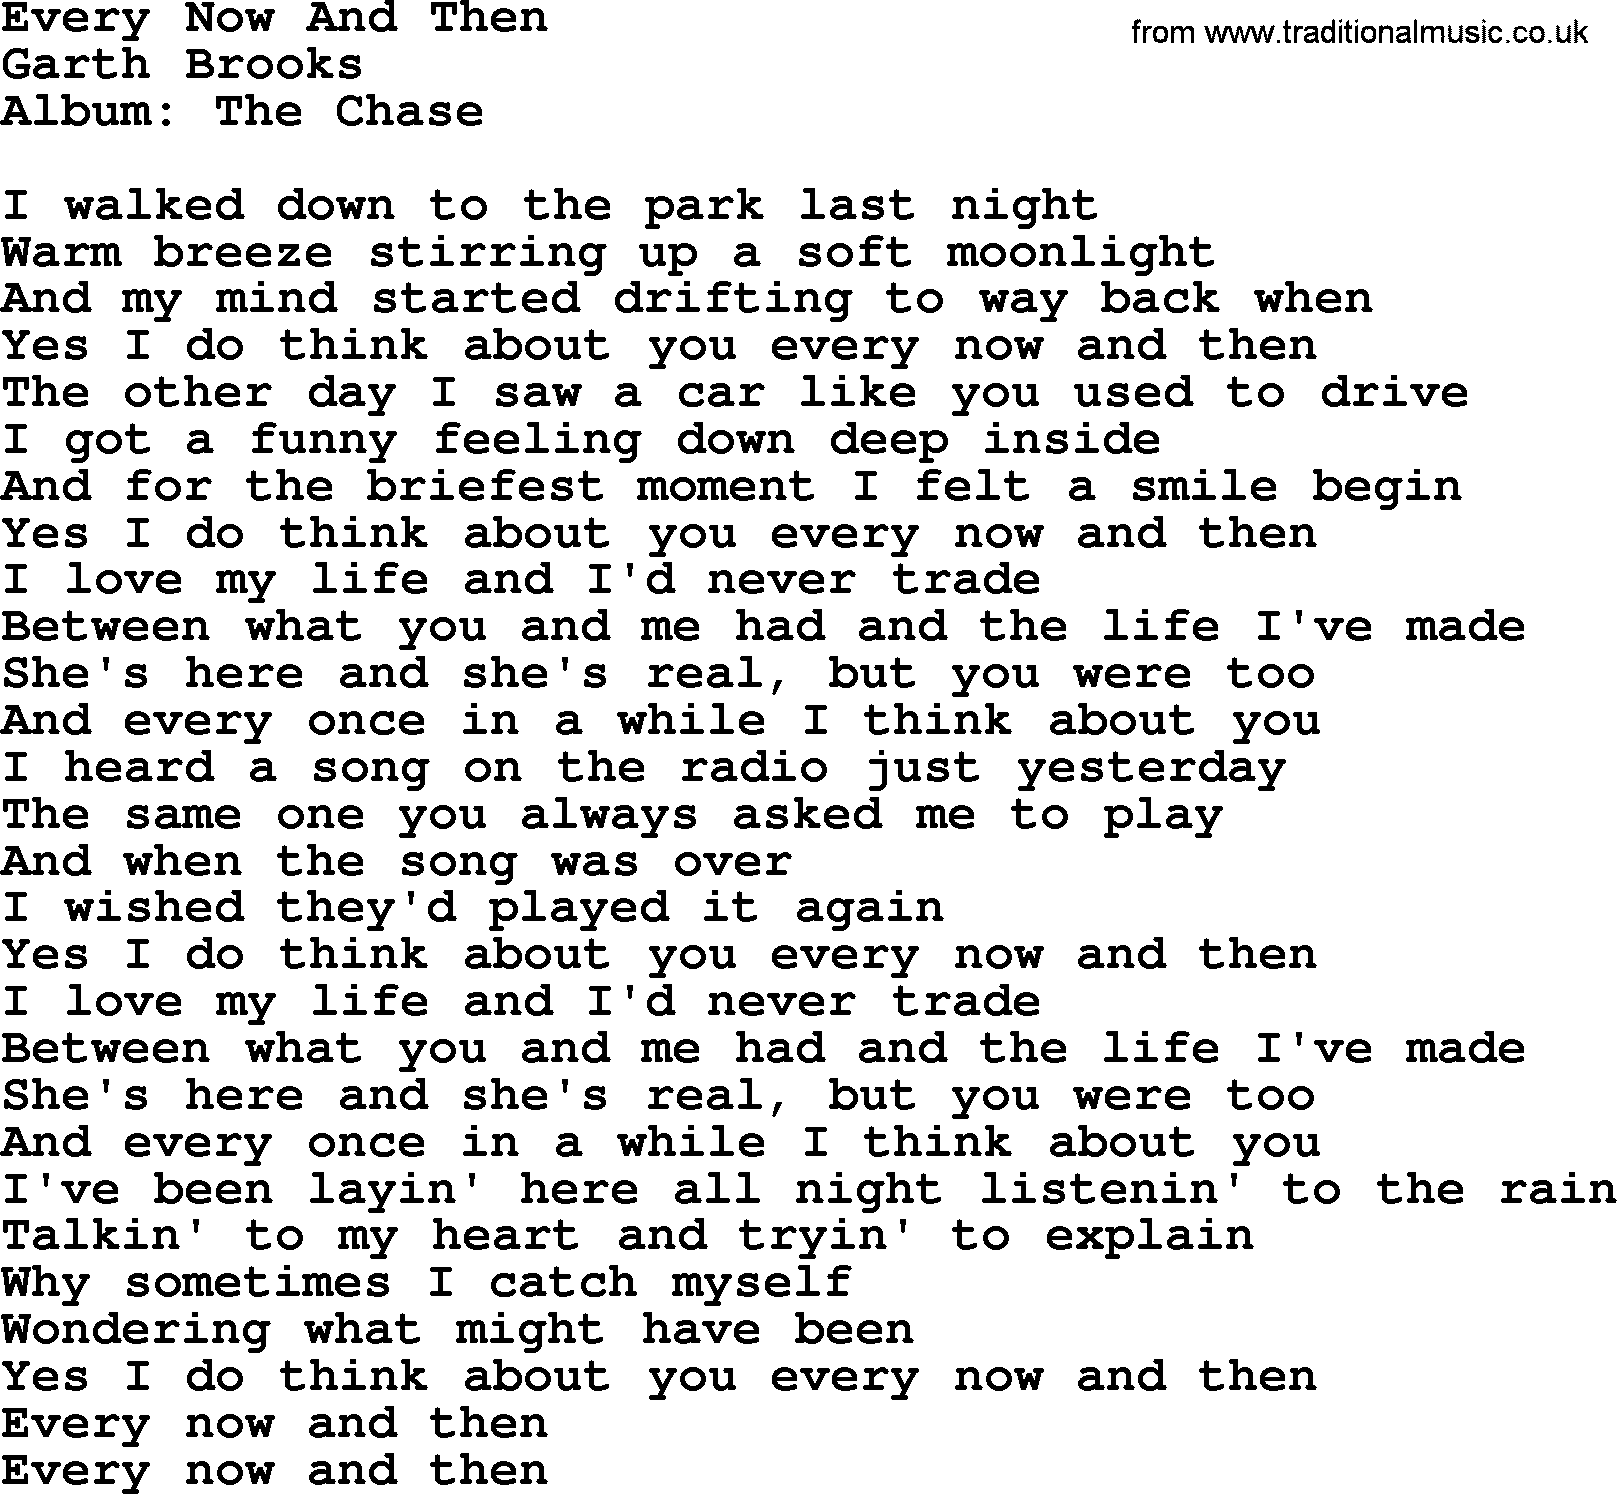 Garth Brooks song: Every Now And Then, lyrics